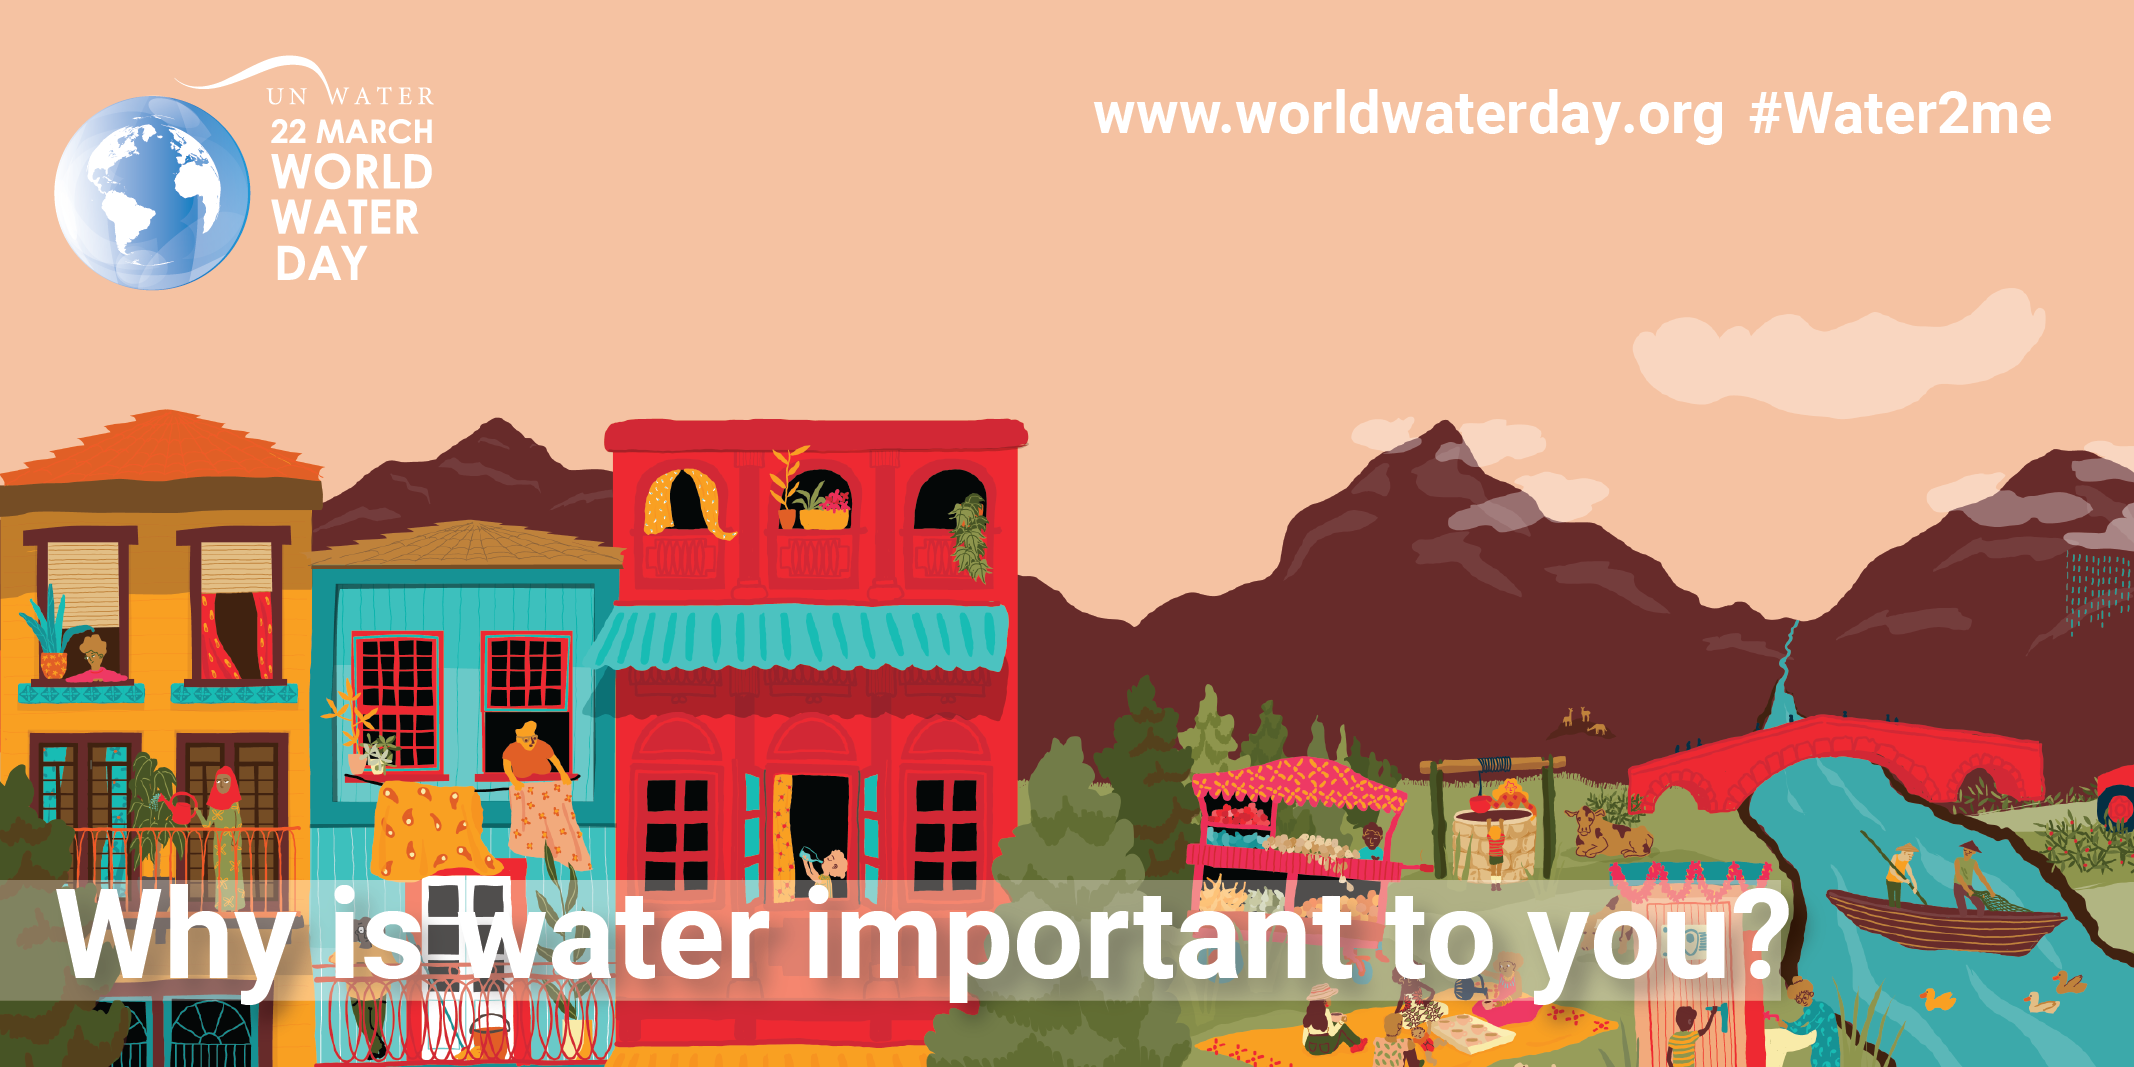 UN World Water Day March 22. Why is water important to you? Learn more at www.worldwaterday.org